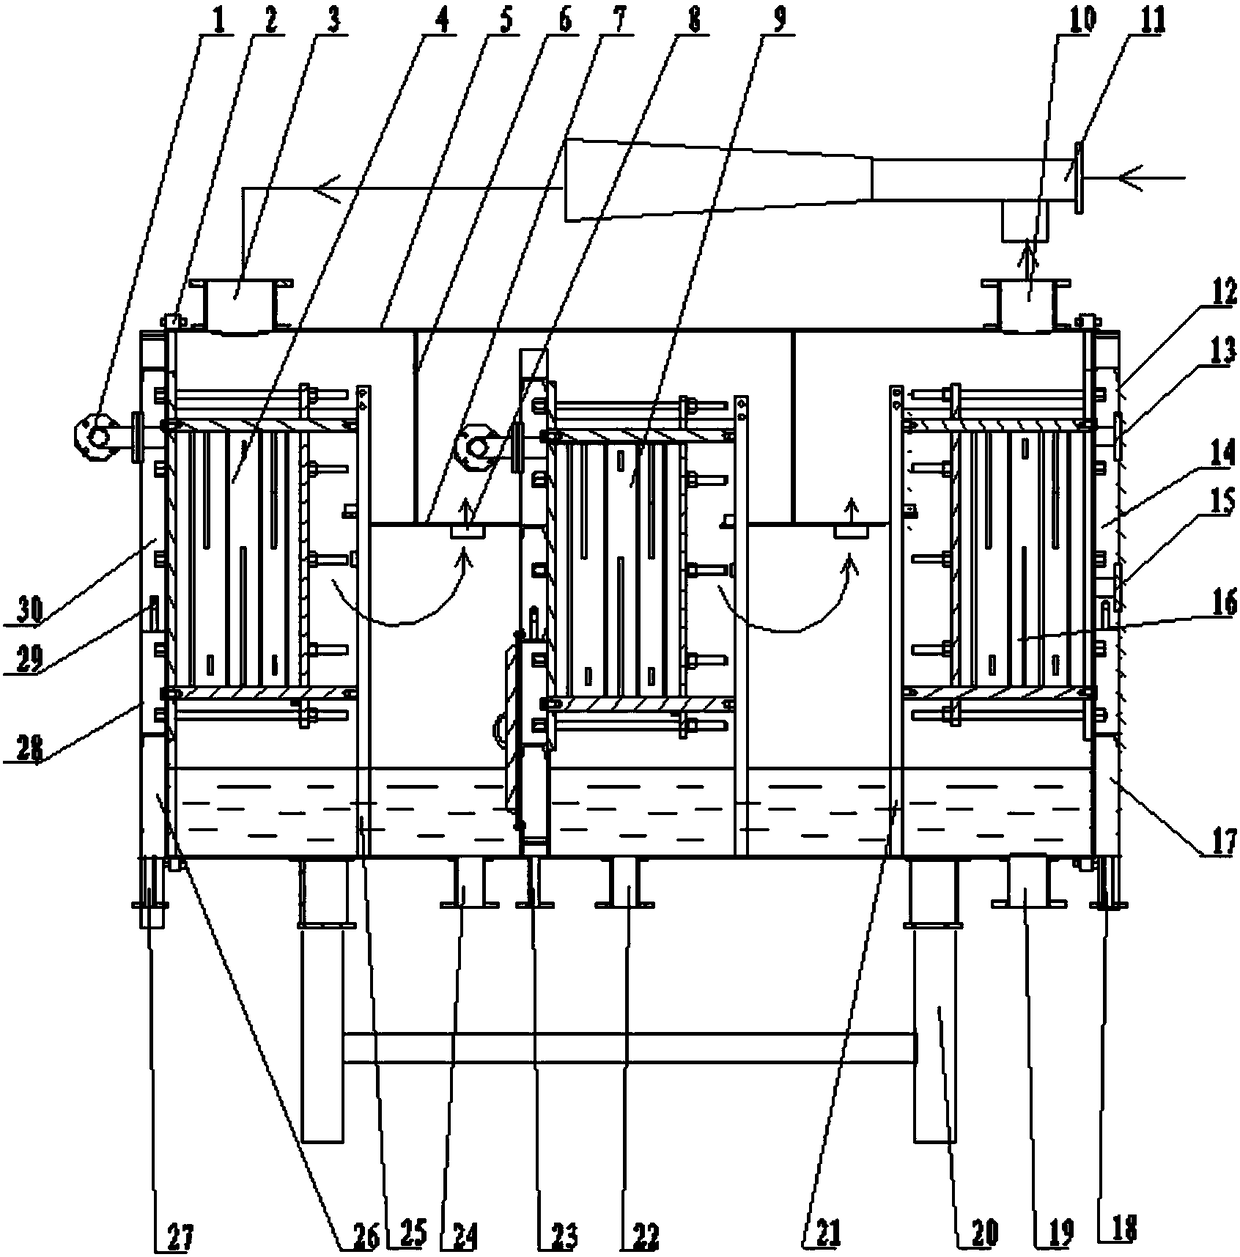 A two-effect plate distillation desalination device